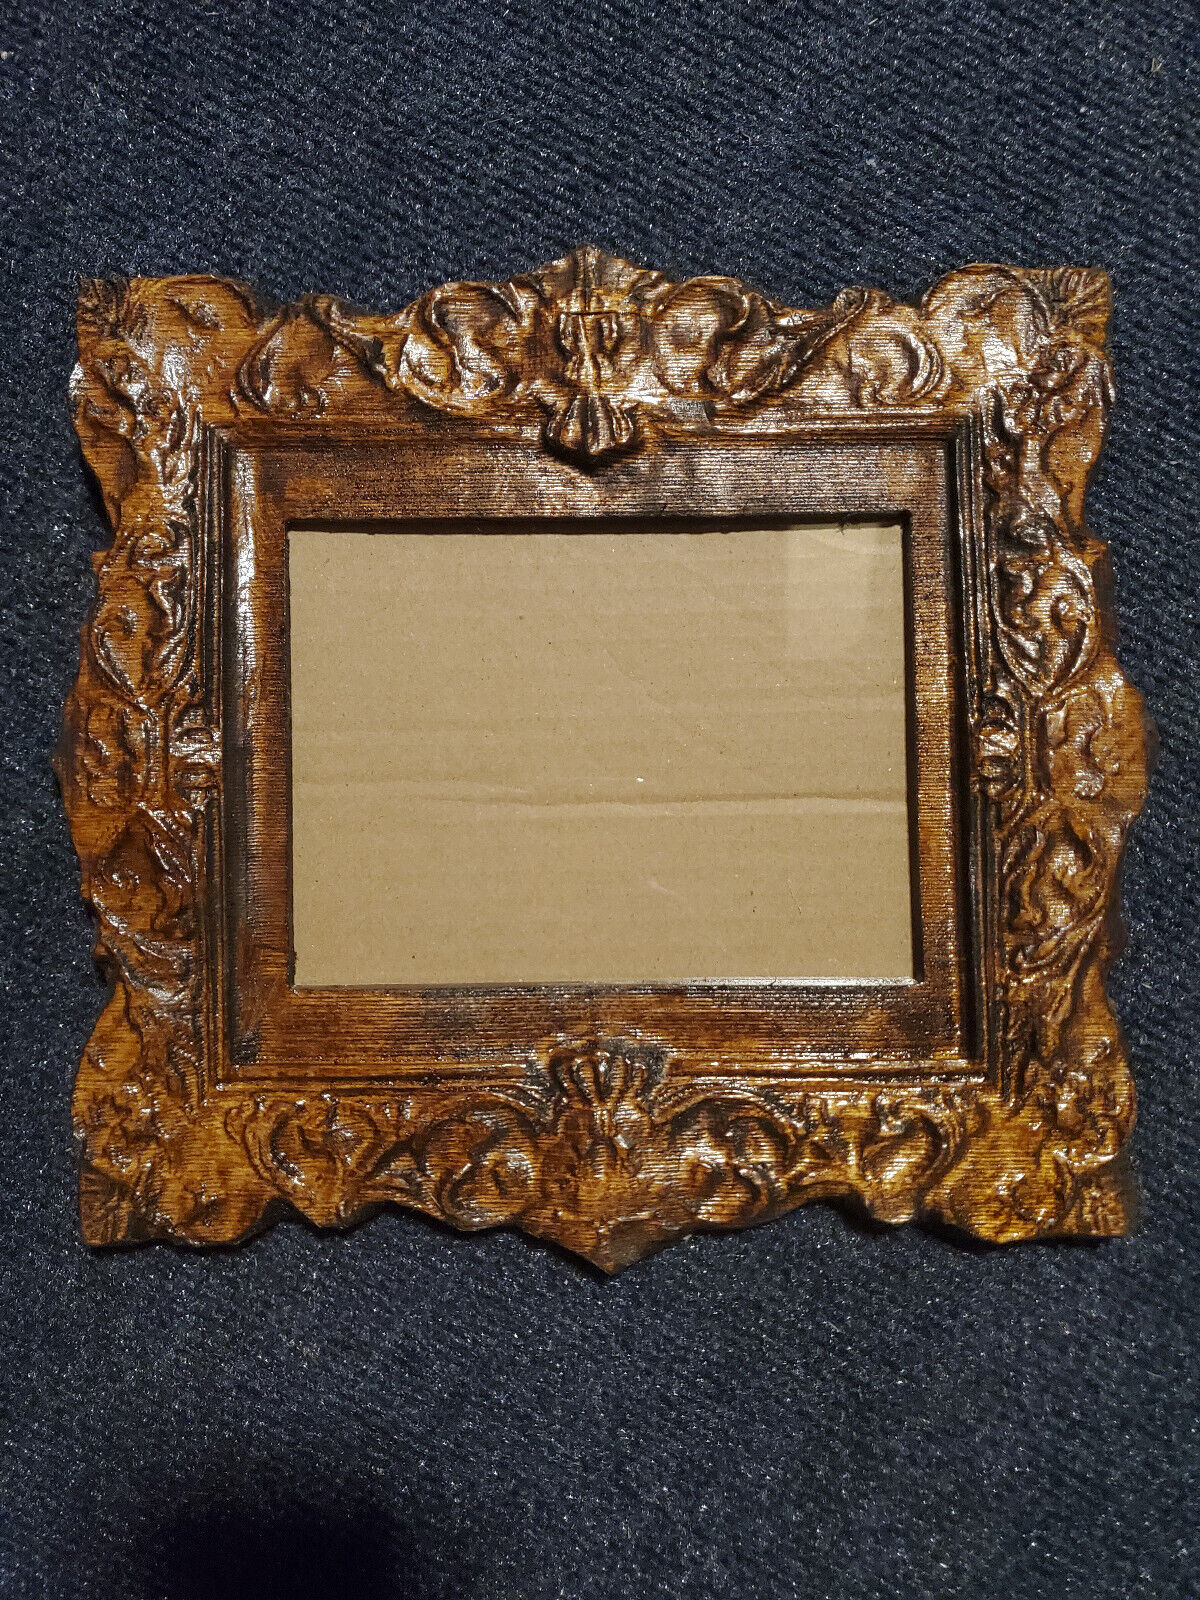 5x7 Ornate Wood Antique Picture Frame Unique Carved and Old Fashioned